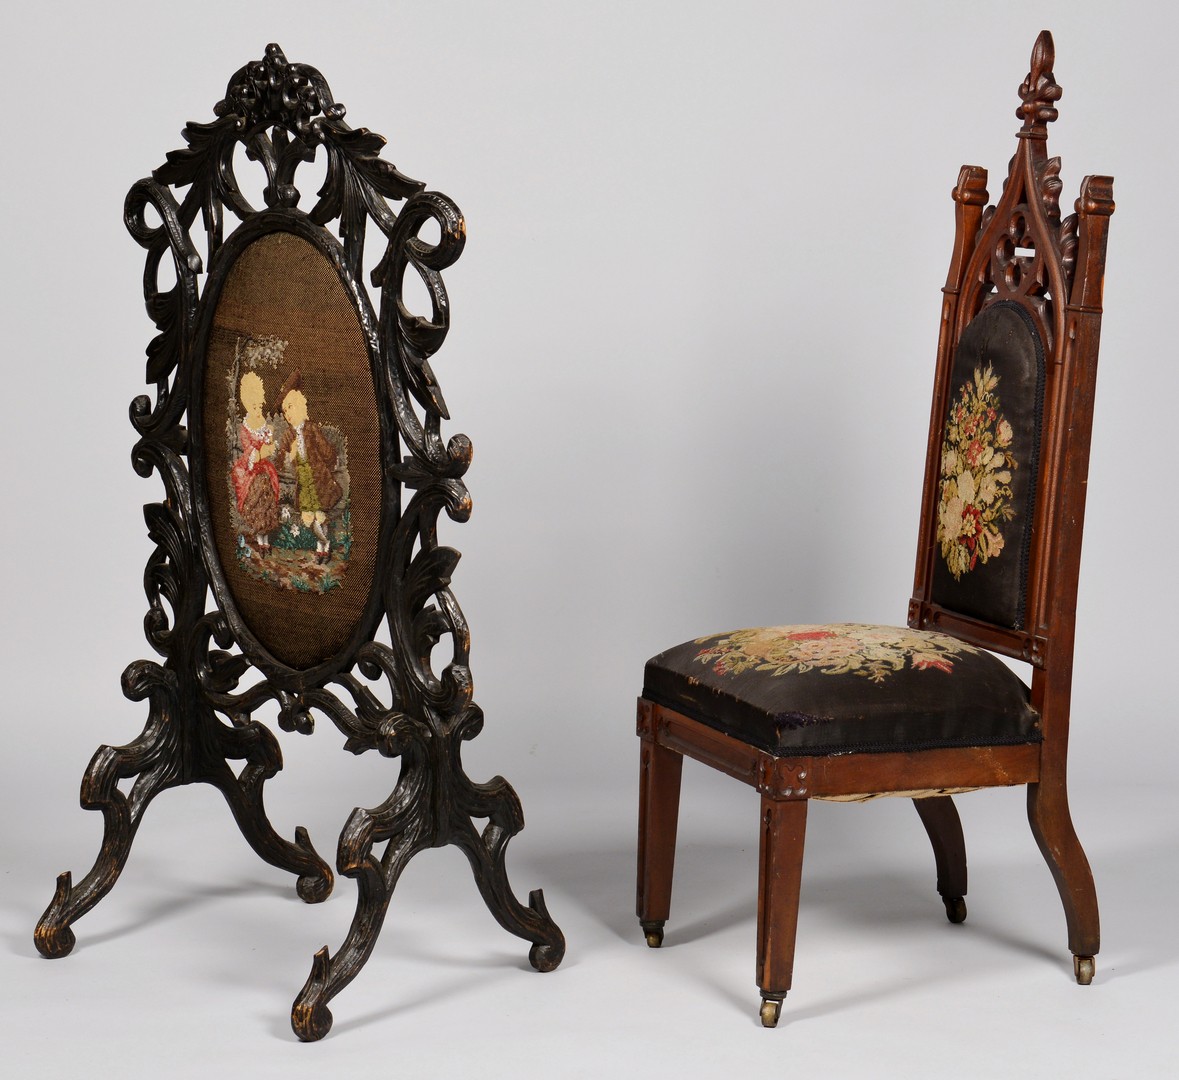 Lot 709: 2 American Gothic Furniture Items, Chair & Screen